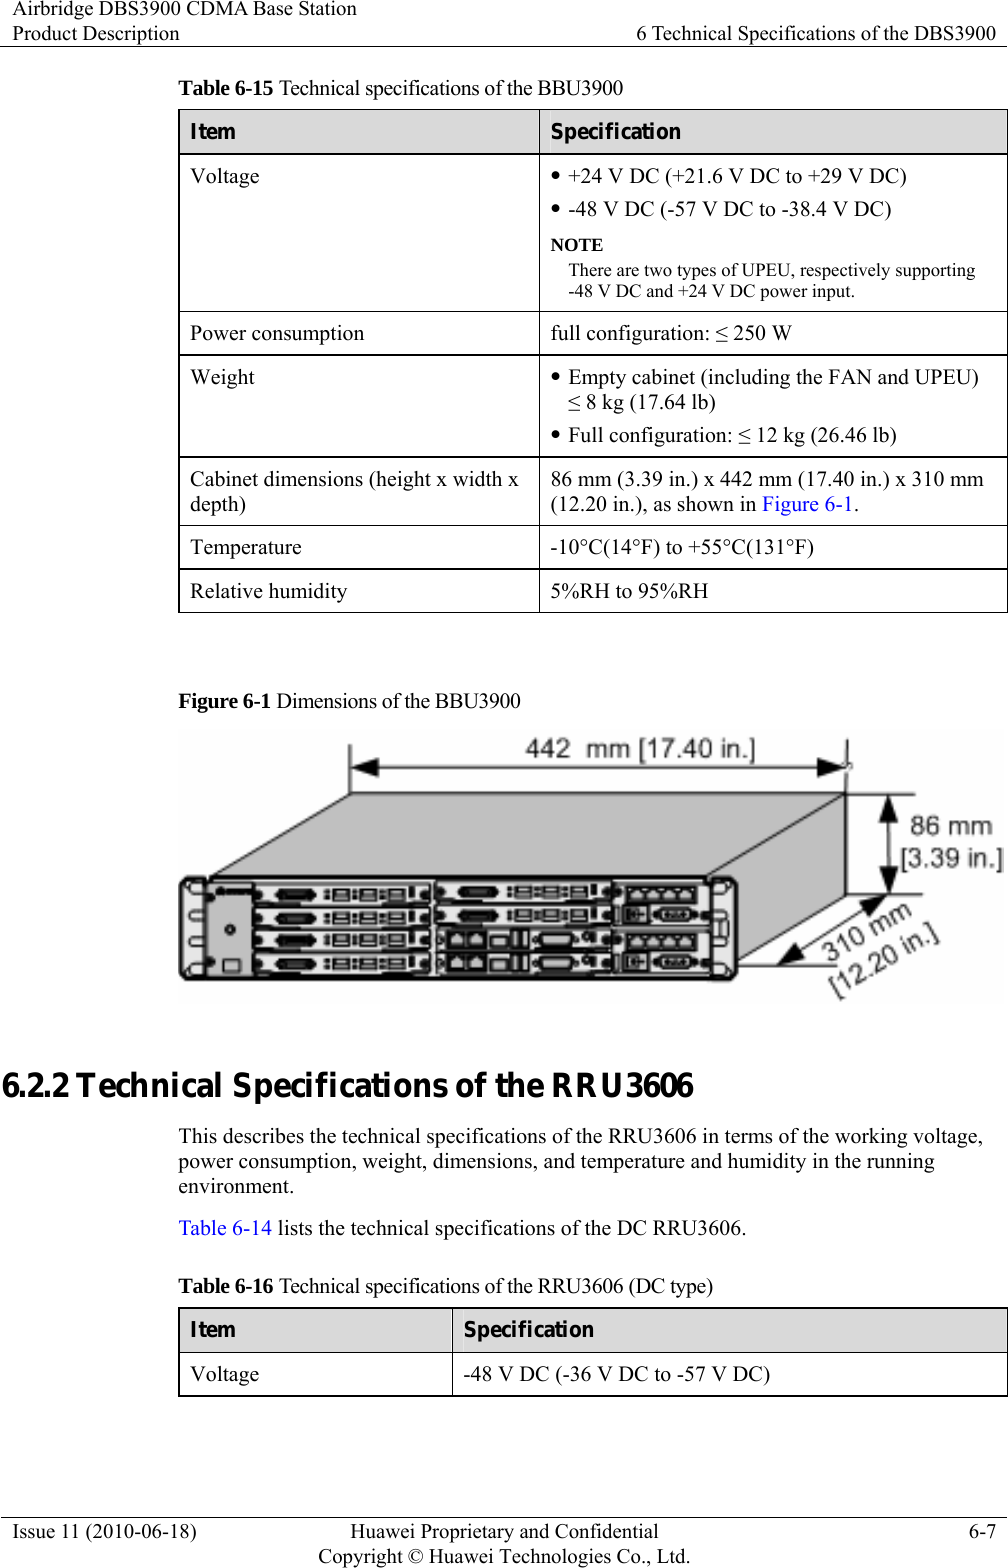 Airbridge DBS3900 CDMA Base Station Product Description  6 Technical Specifications of the DBS3900 Issue 11 (2010-06-18)  Huawei Proprietary and Confidential         Copyright © Huawei Technologies Co., Ltd.6-7 Table 6-15 Technical specifications of the BBU3900 Item  Specification Voltage  z +24 V DC (+21.6 V DC to +29 V DC) z -48 V DC (-57 V DC to -38.4 V DC) NOTE There are two types of UPEU, respectively supporting -48 V DC and +24 V DC power input. Power consumption  full configuration: ≤ 250 W Weight  z Empty cabinet (including the FAN and UPEU) ≤ 8 kg (17.64 lb) z Full configuration: ≤ 12 kg (26.46 lb) Cabinet dimensions (height x width x depth) 86 mm (3.39 in.) x 442 mm (17.40 in.) x 310 mm (12.20 in.), as shown in Figure 6-1. Temperature  -10°C(14°F) to +55°C(131°F) Relative humidity  5%RH to 95%RH  Figure 6-1 Dimensions of the BBU3900   6.2.2 Technical Specifications of the RRU3606 This describes the technical specifications of the RRU3606 in terms of the working voltage, power consumption, weight, dimensions, and temperature and humidity in the running environment. Table 6-14 lists the technical specifications of the DC RRU3606. Table 6-16 Technical specifications of the RRU3606 (DC type)   Item  Specification Voltage  -48 V DC (-36 V DC to -57 V DC) 